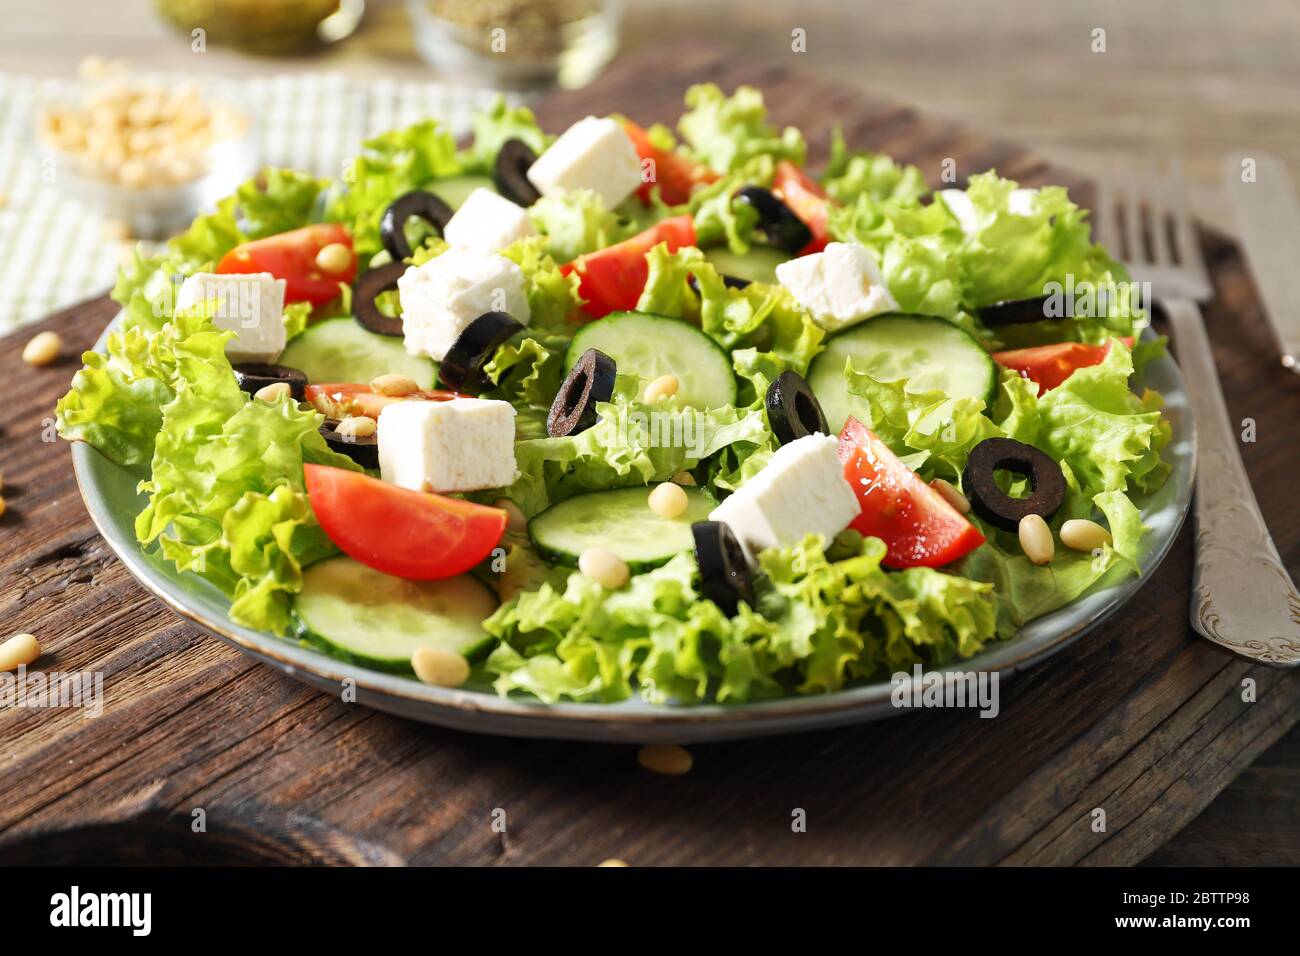 Plate with tasty greek salad of fresh vegetables on wooden background Stock Photo